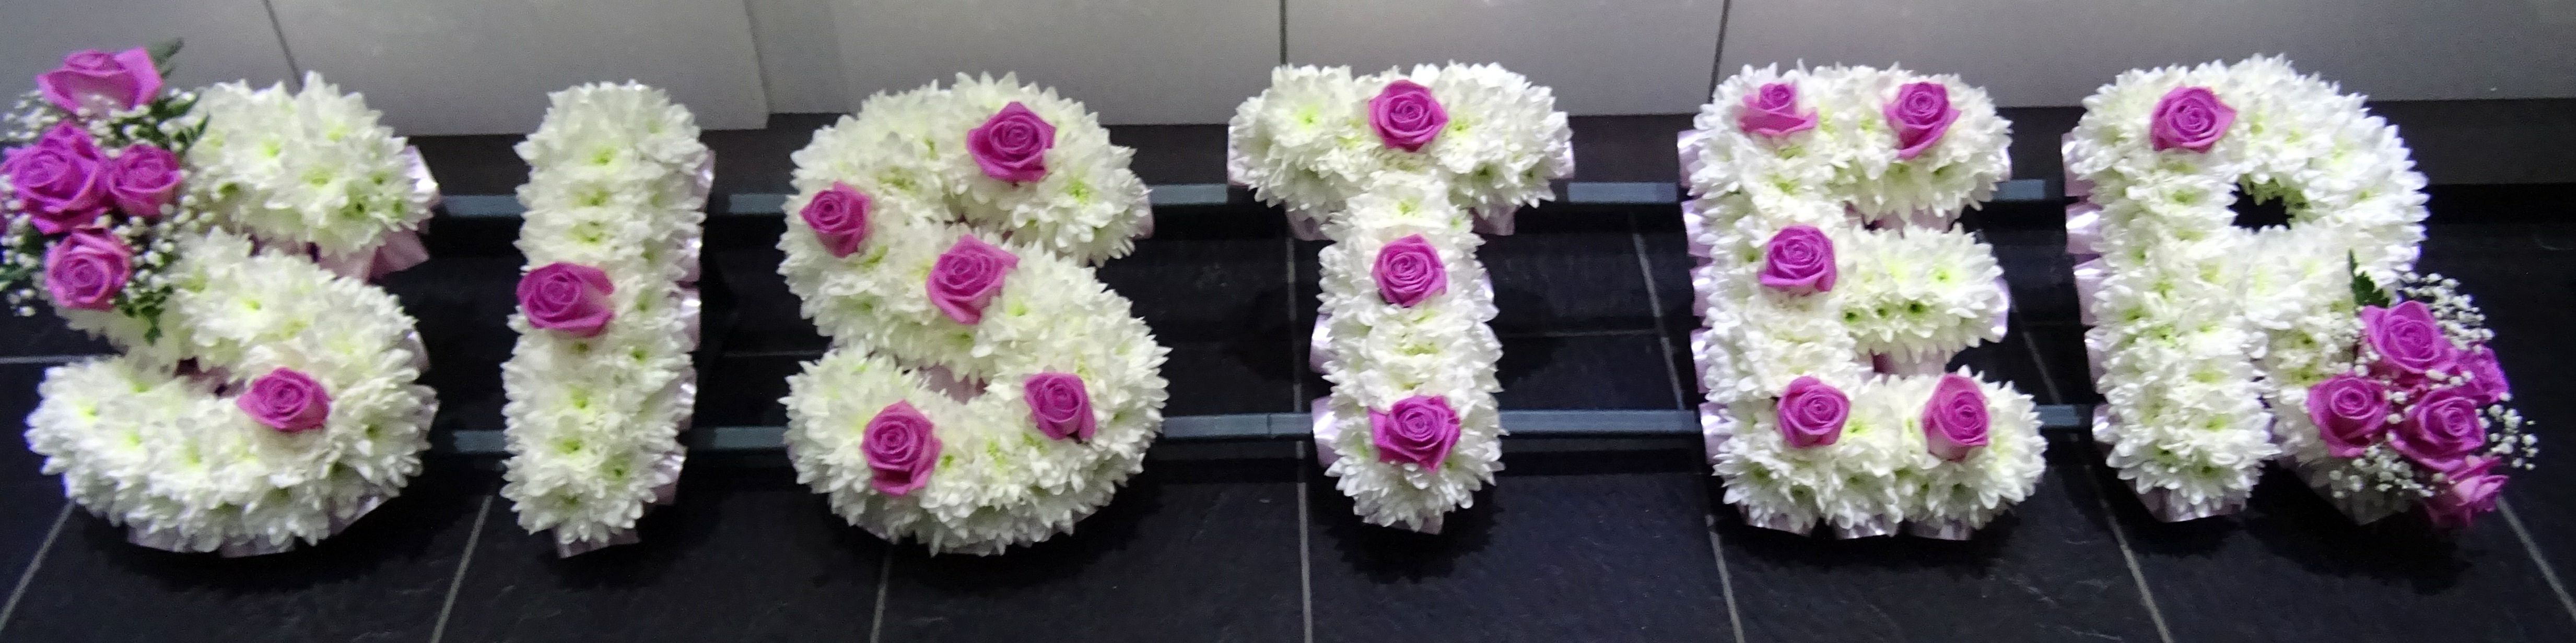 Sister tribute with lovely pink roses scattered through | Funeral ...